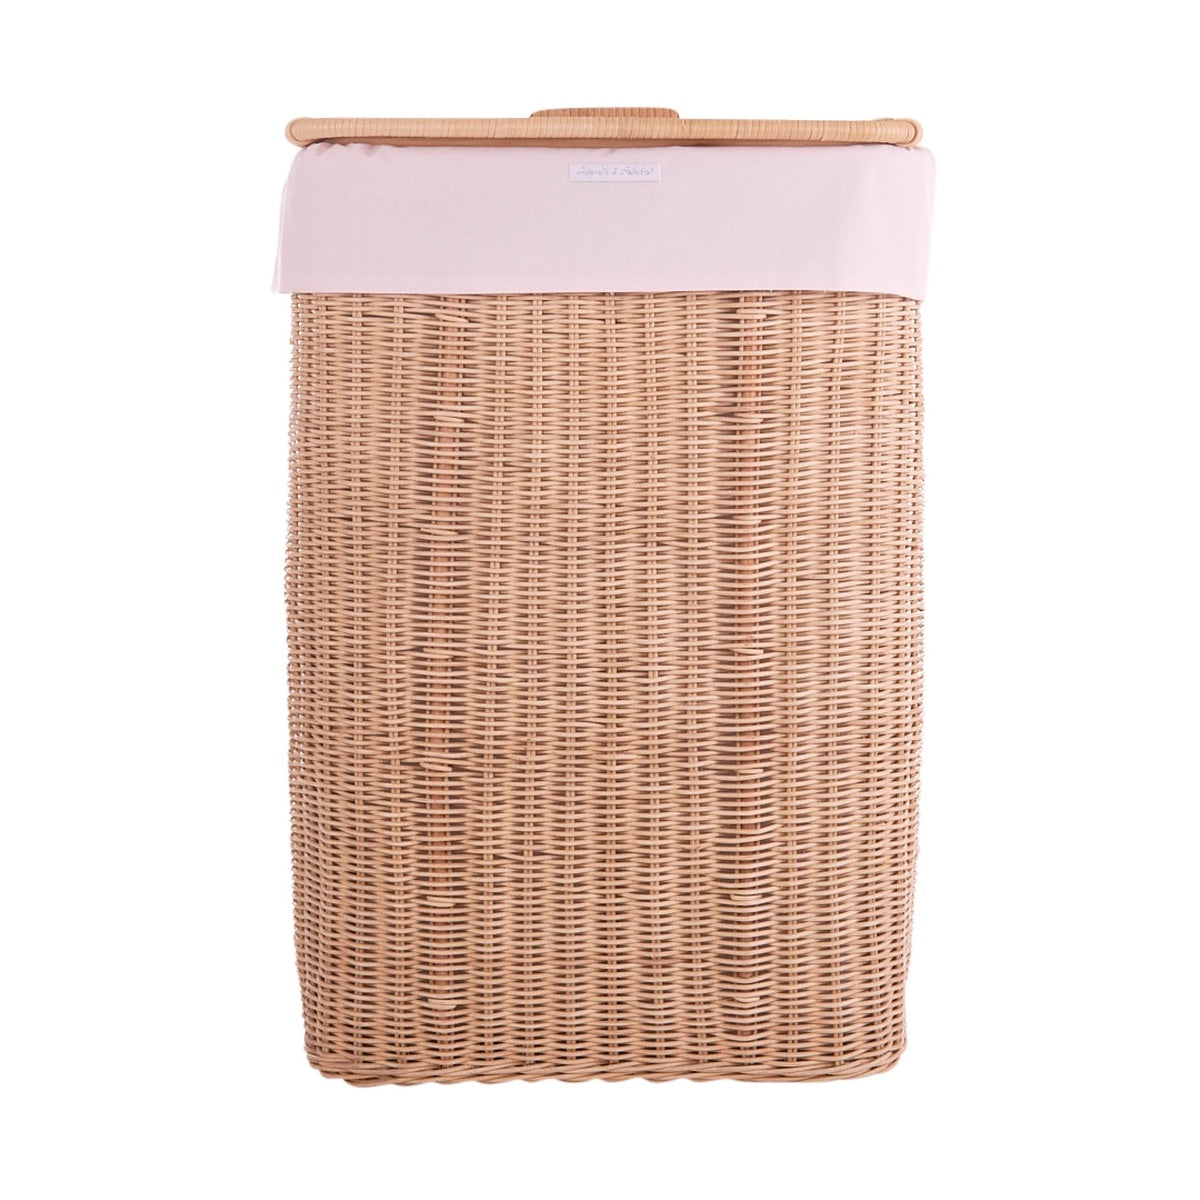 Theophile & Patachou Rectangular Natural Wicker Basket and Cover - Cotton Pink